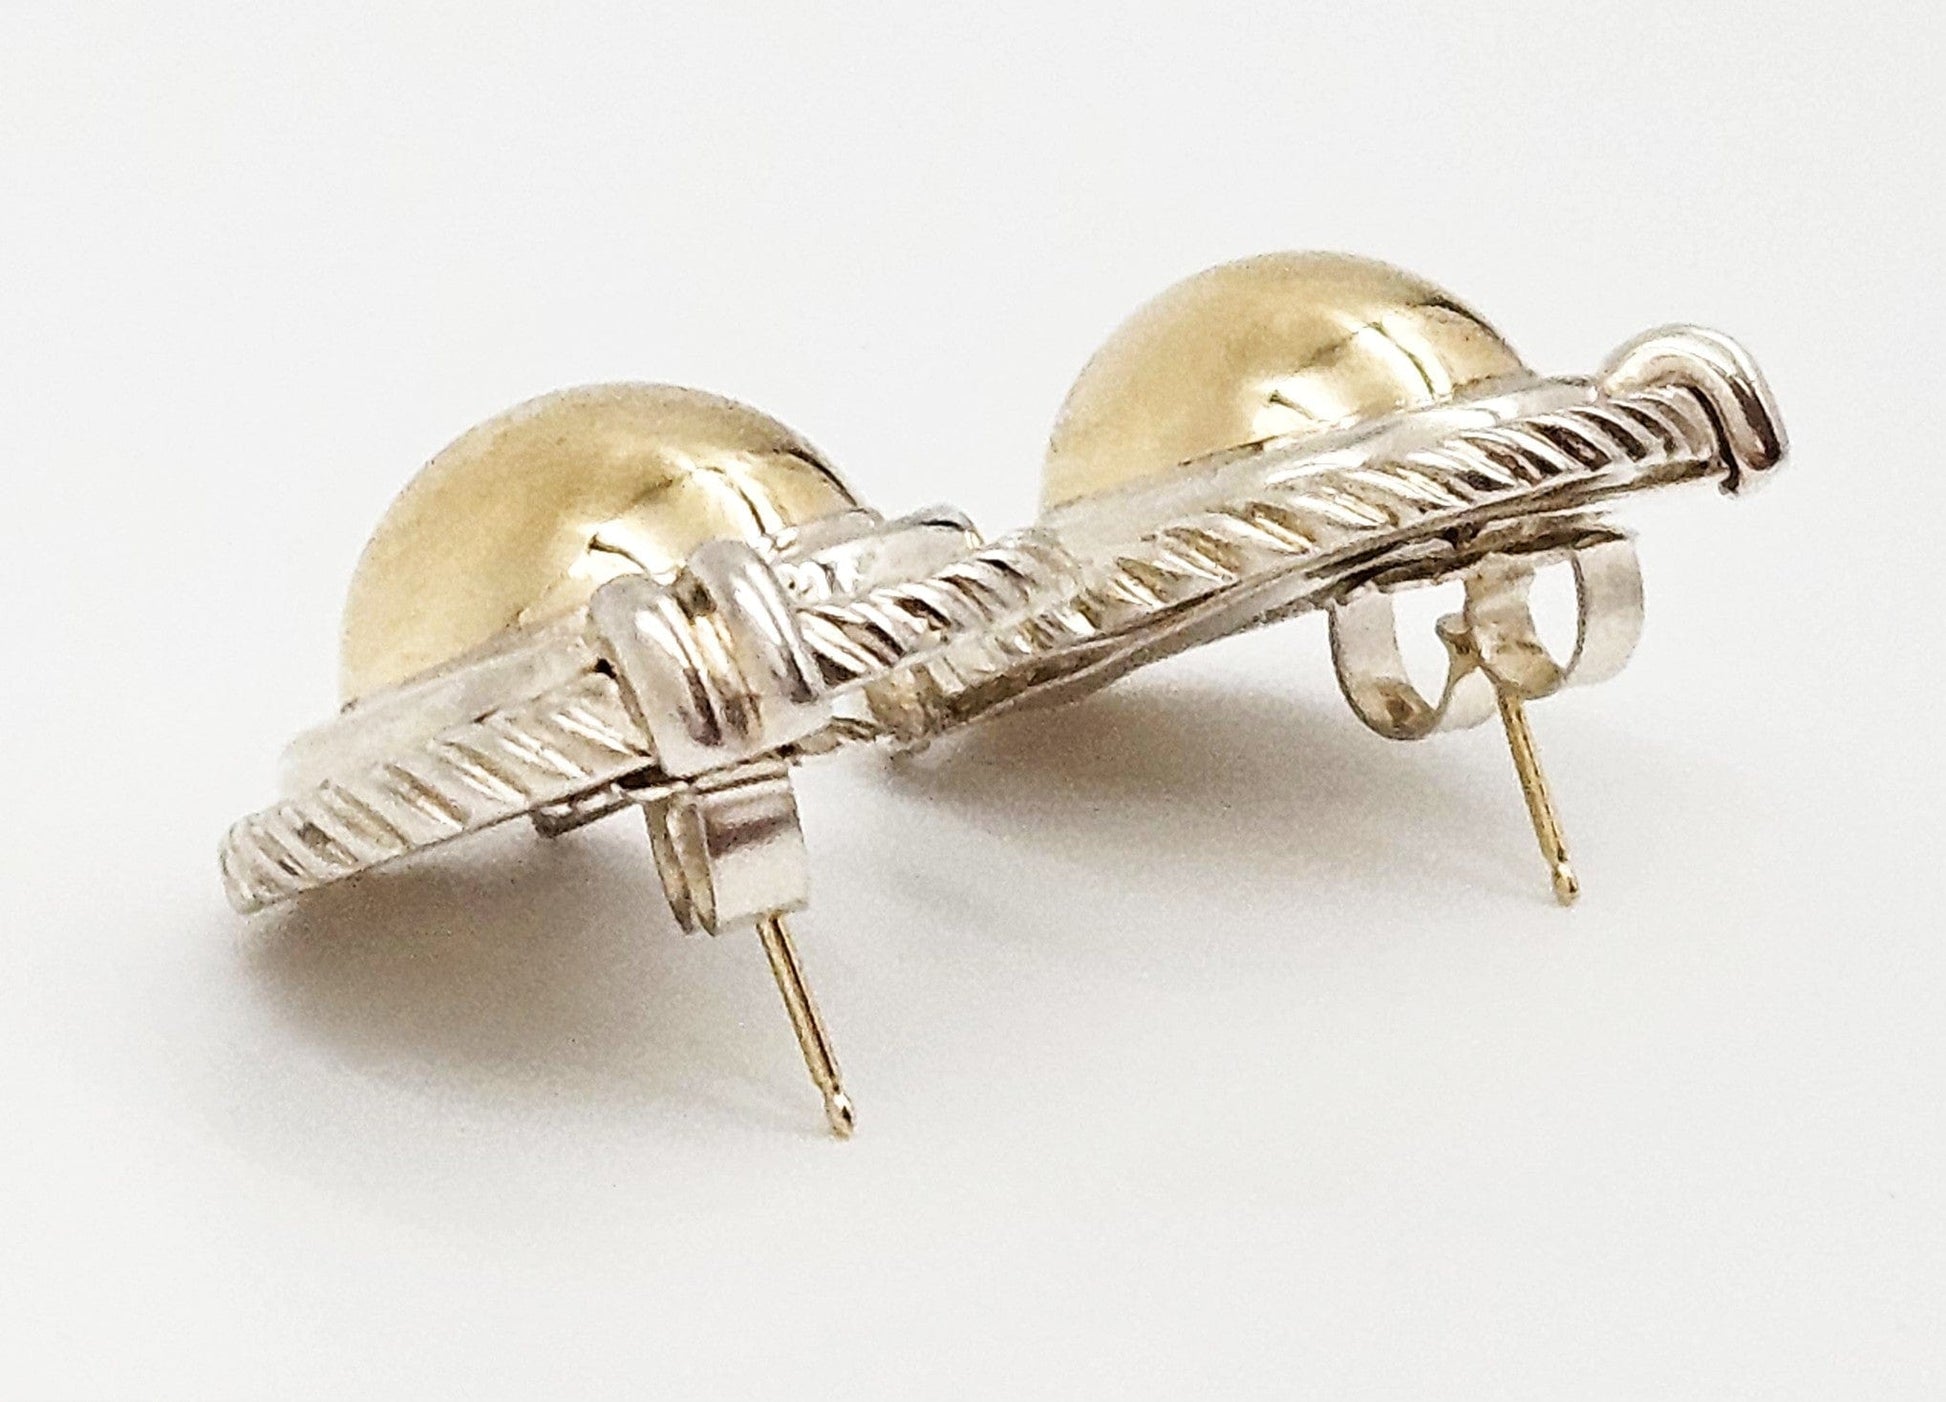 Peter Brams Designs Jewelry Peter Brams Designs Sterling & 14k Gold Large 3D Dome Earrings Circa 1980s